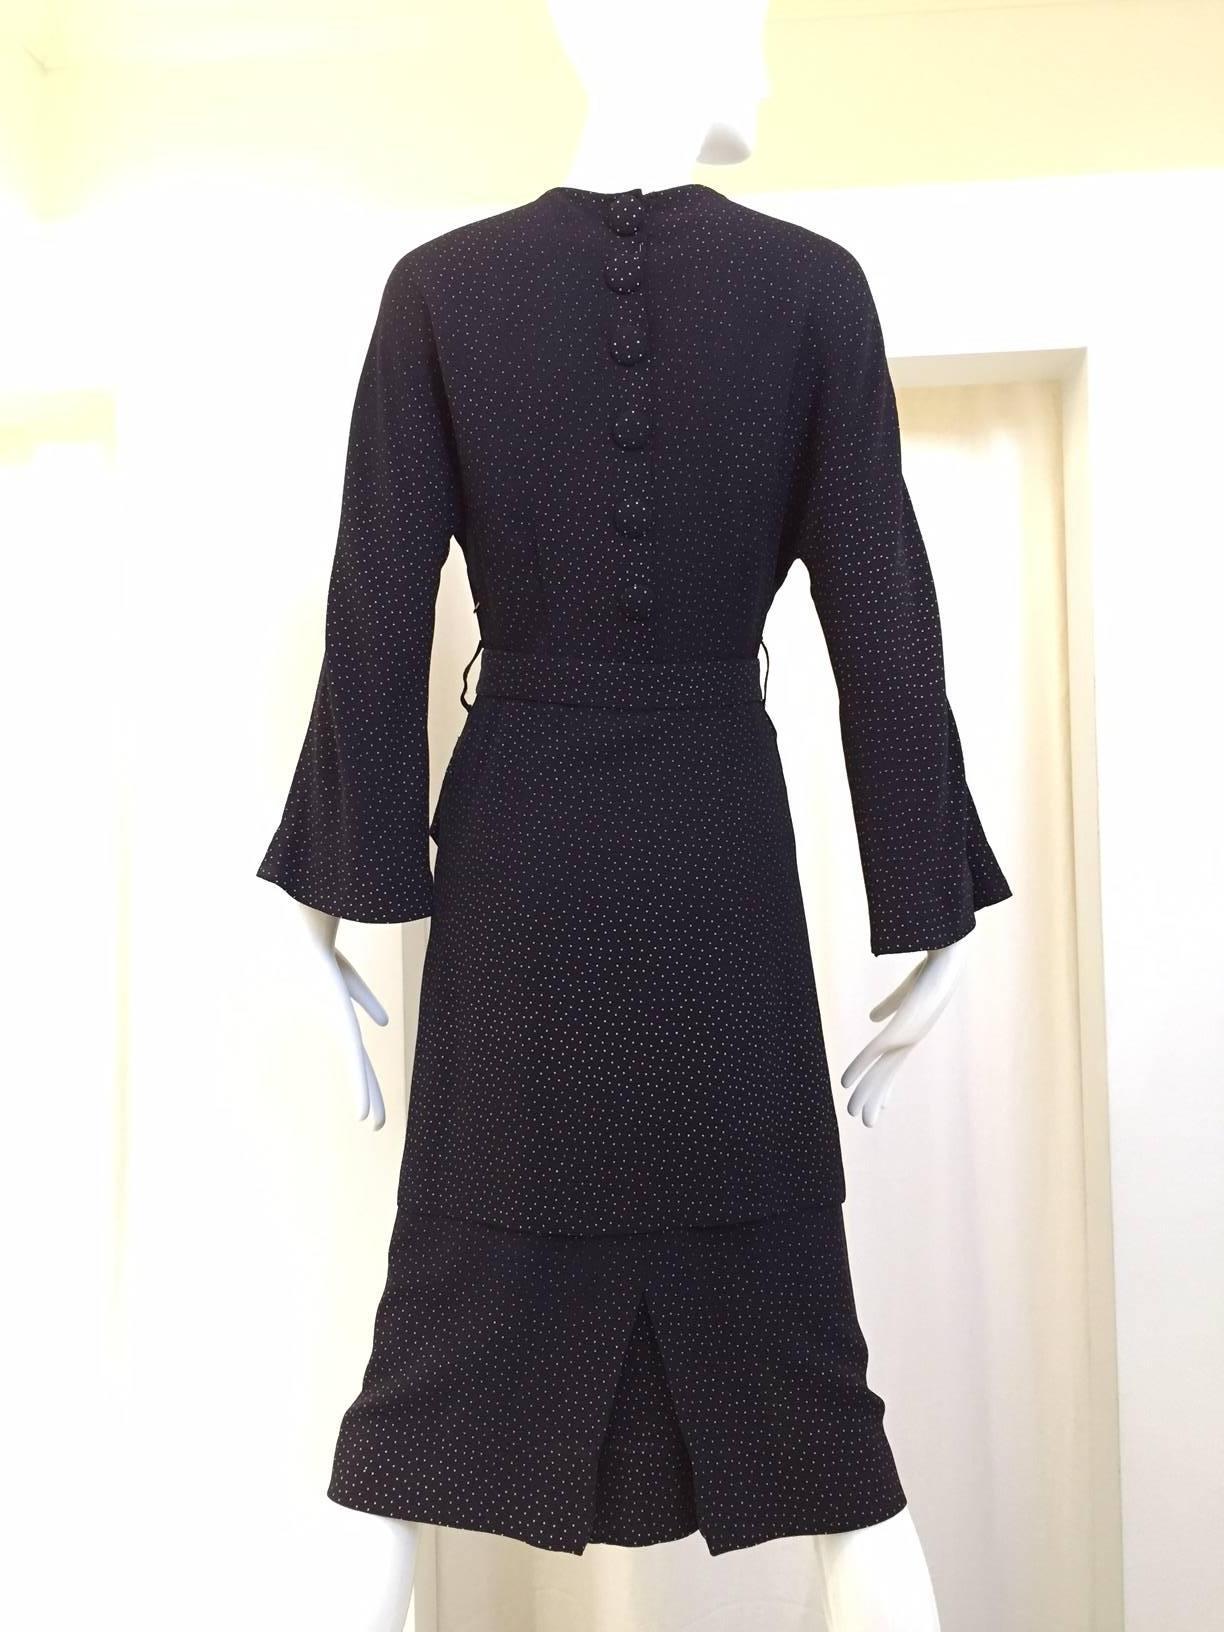 Vintage 1940s Navy Blue Crepe Dress with White Small Polkadots im Zustand „Gut“ in Beverly Hills, CA